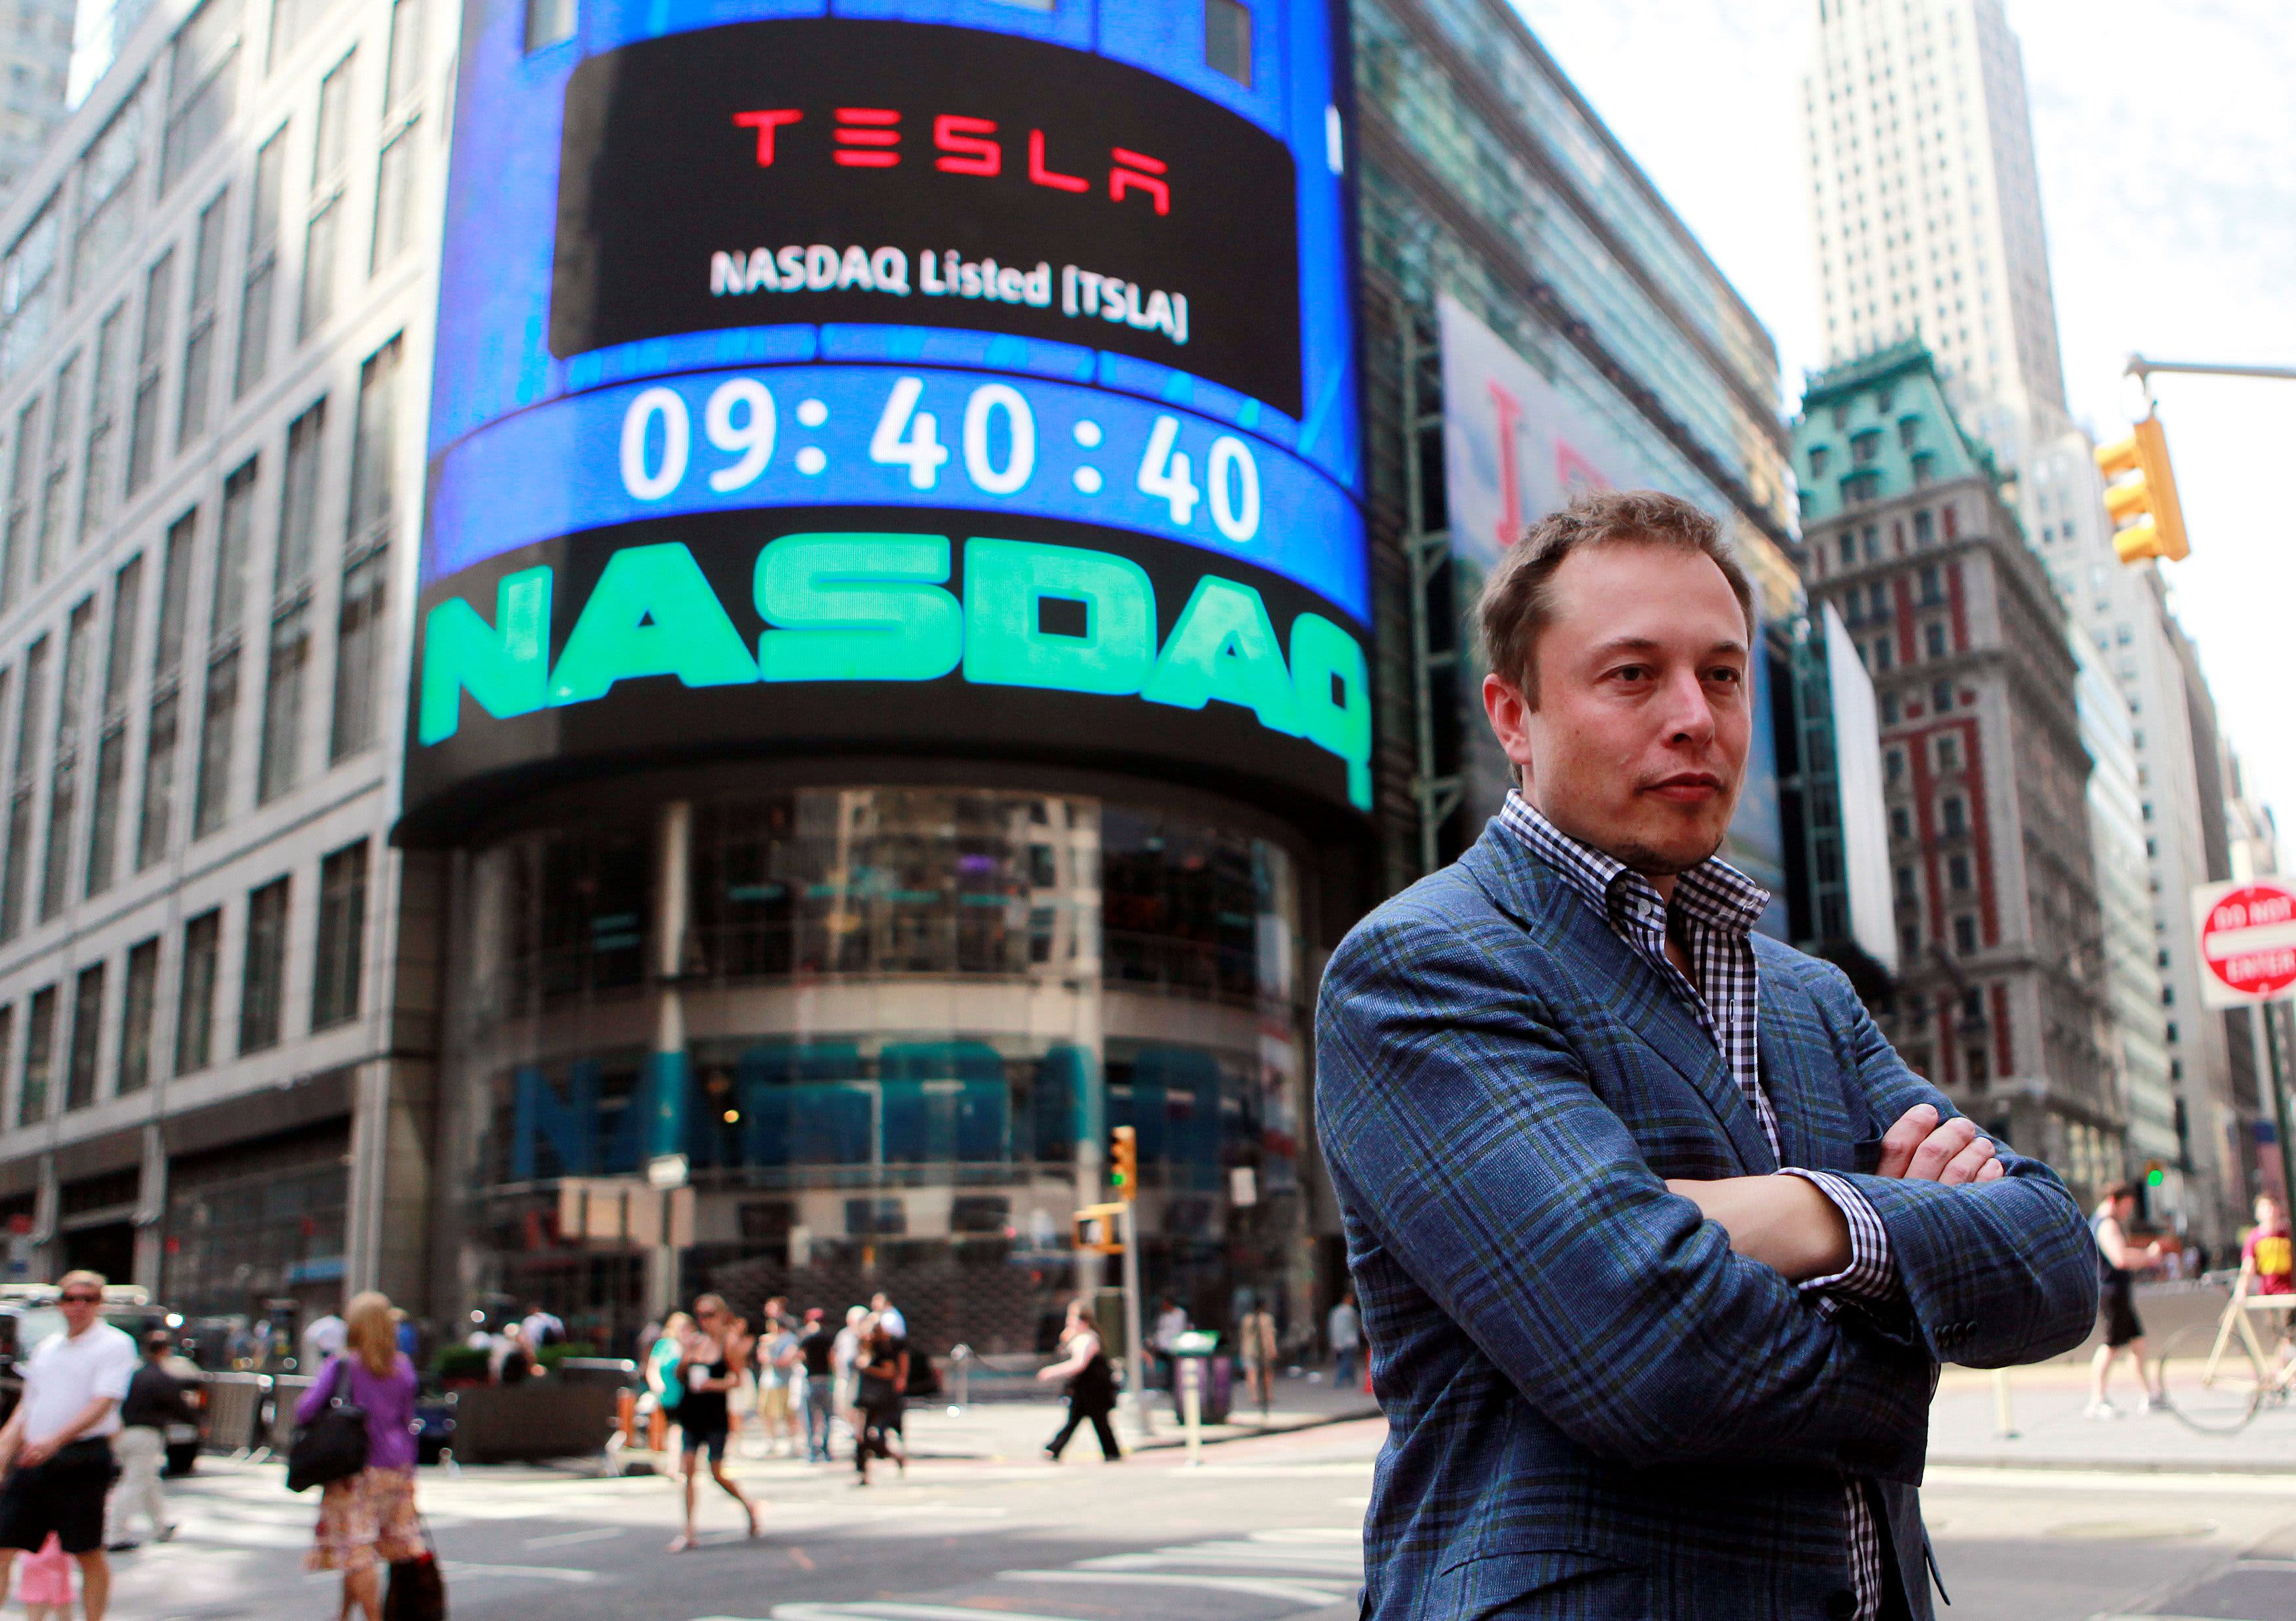 Tesla shares in the bubble territory amid rumors about Apple cars, says the researcher